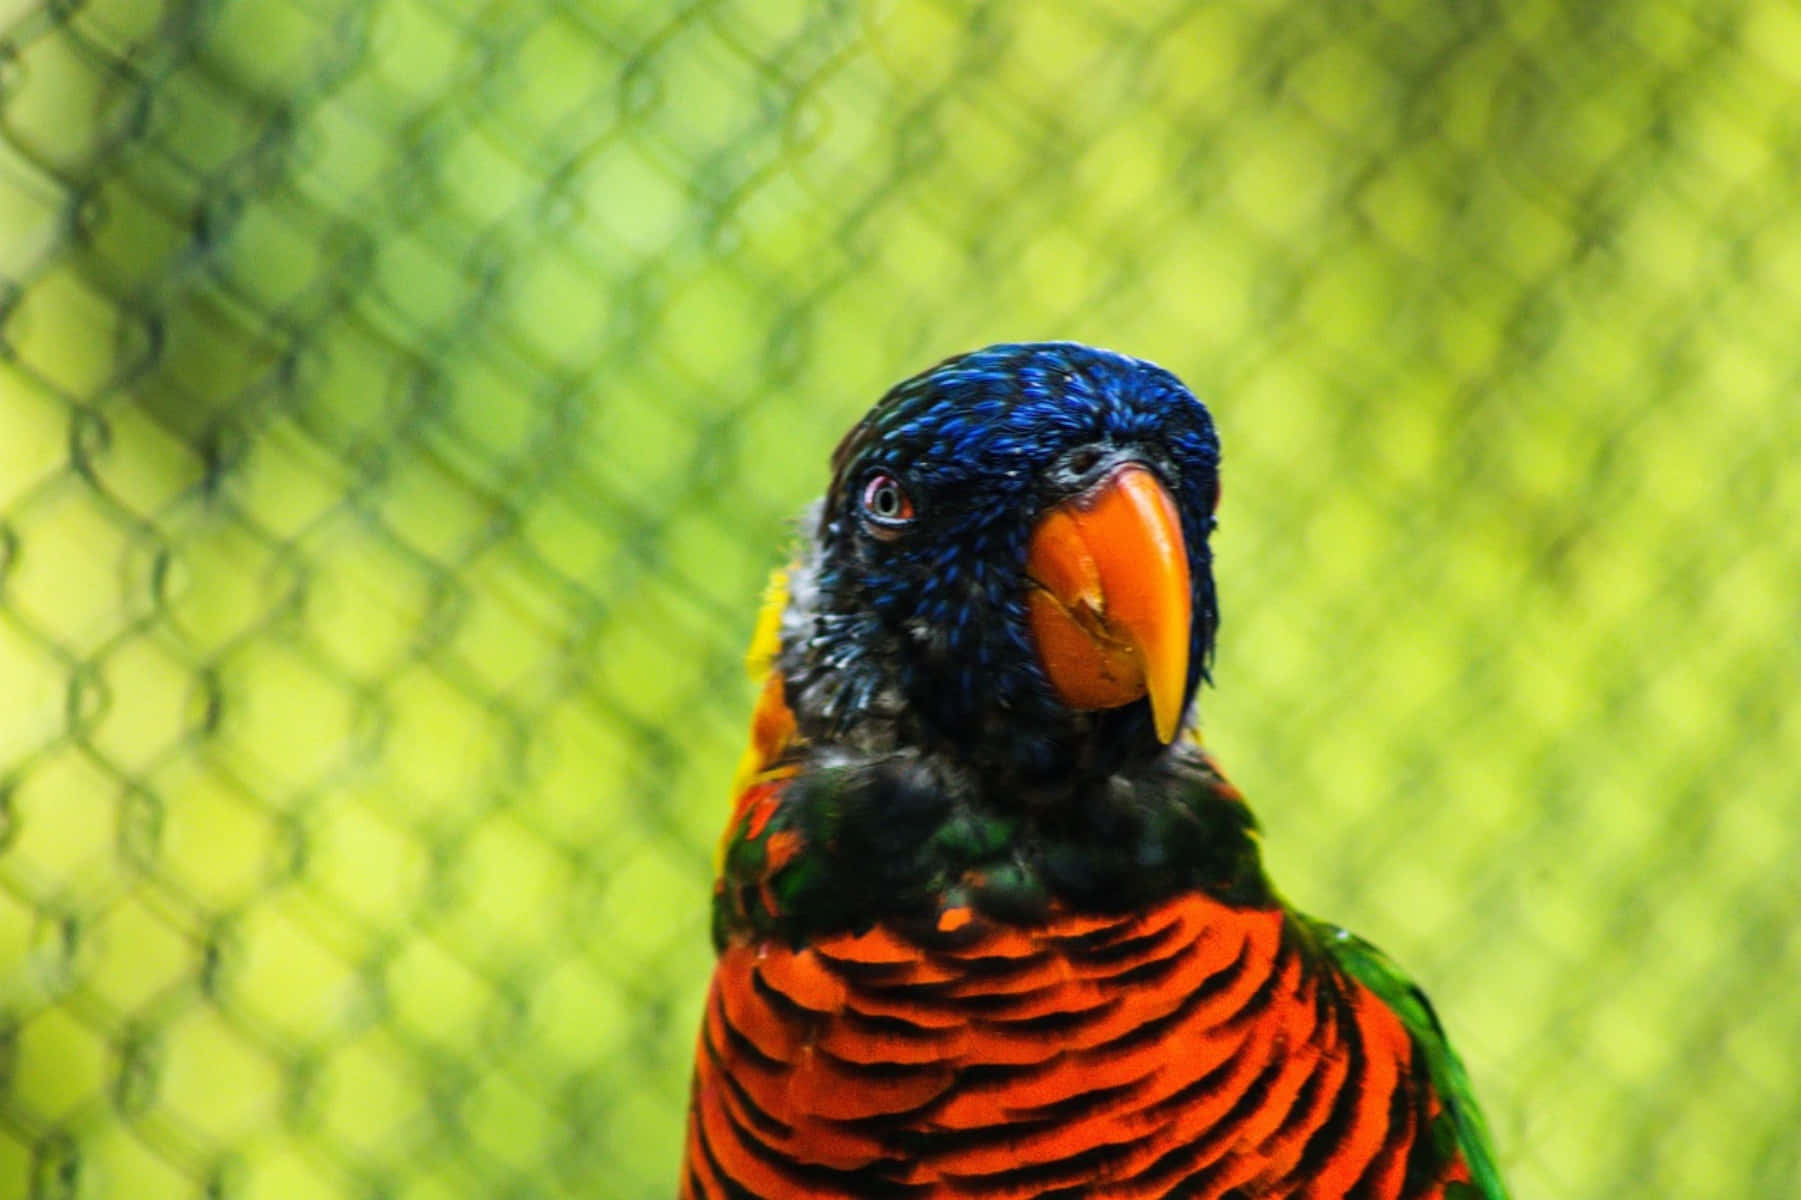 Colorful Lory Bird Behind Fence Wallpaper